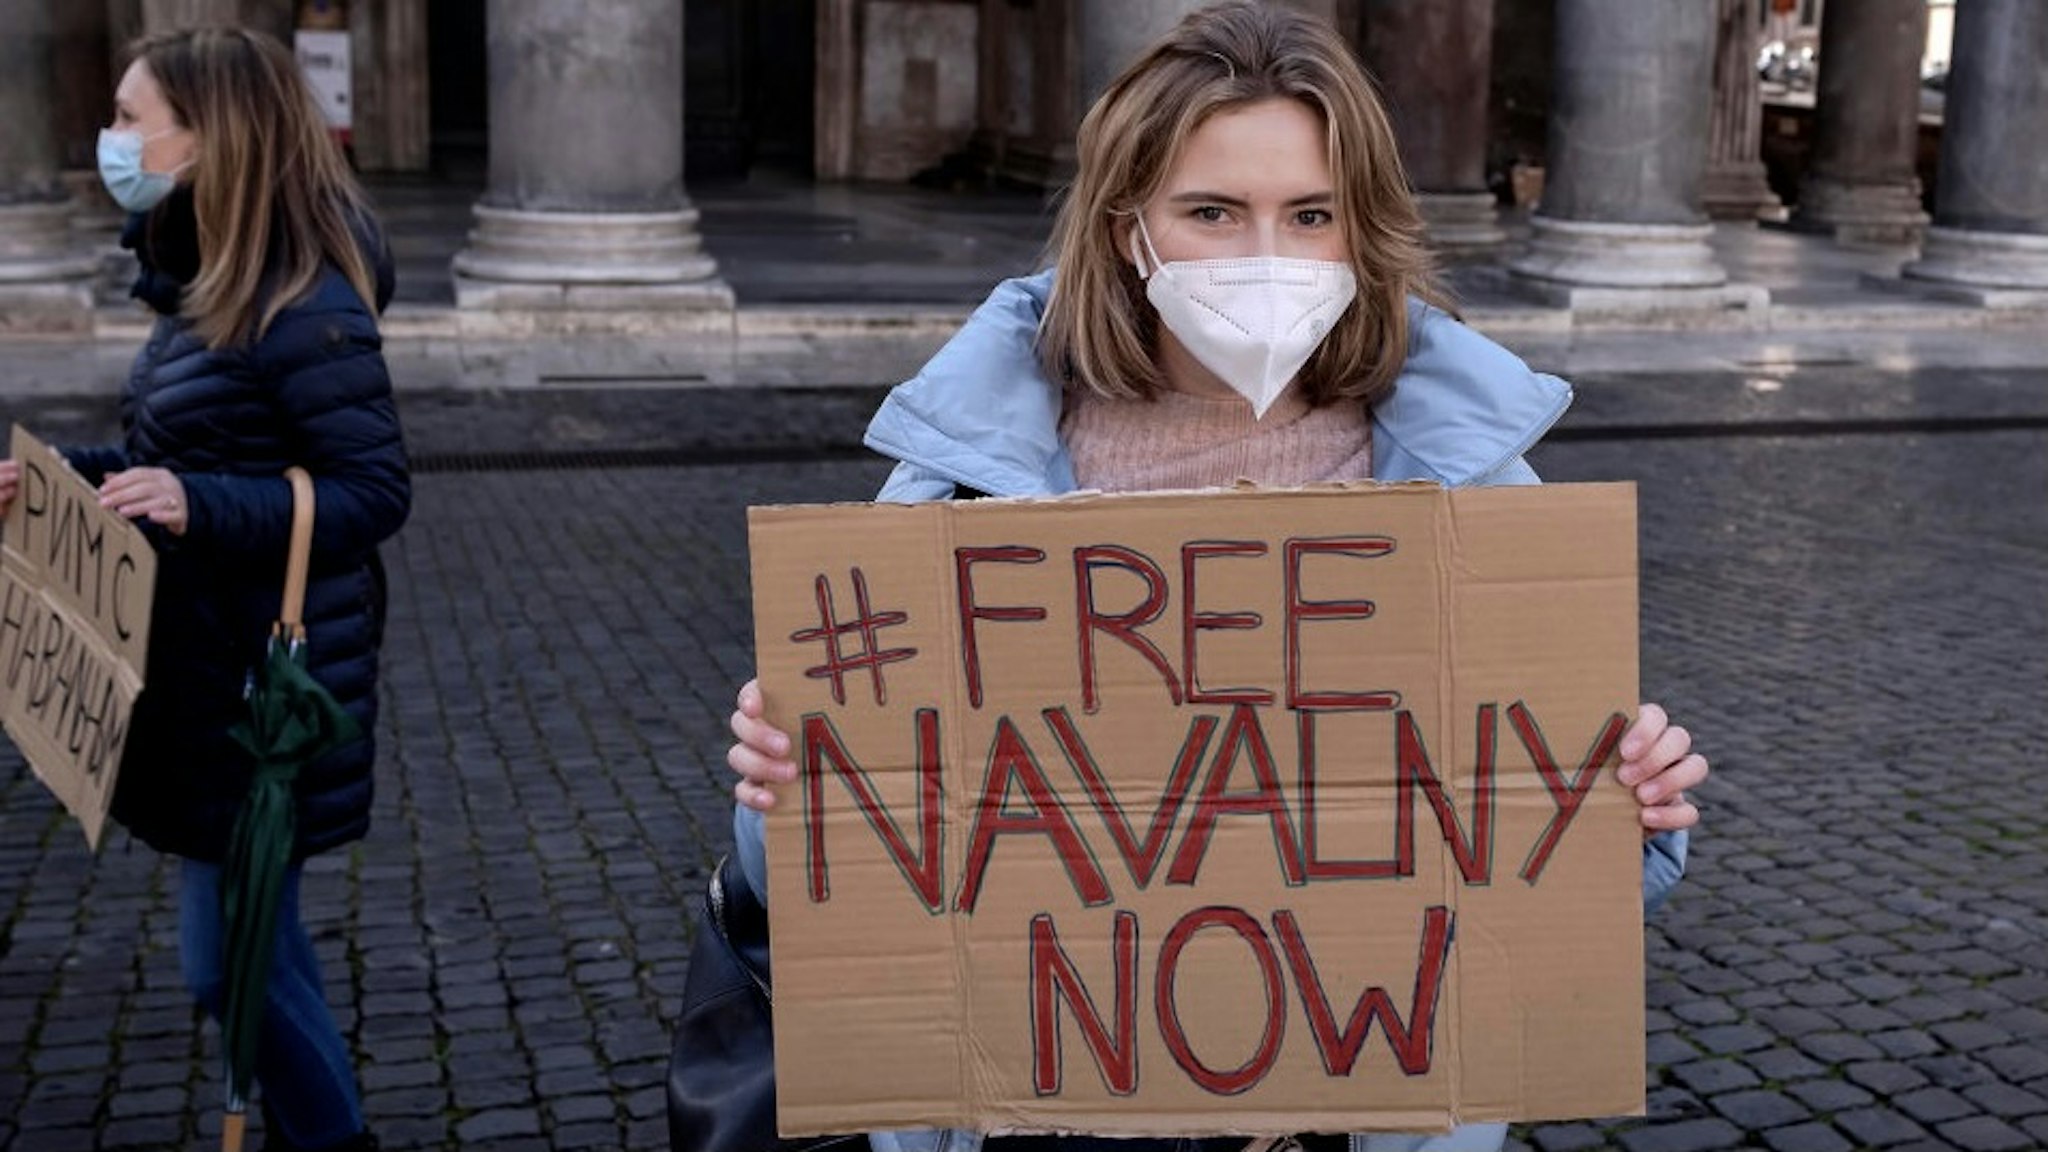 ROME, ITALY - JANUARY 23: Supporters of Russian opposition politician Alexei Navalny gather in the downtown to protest for his release from prison on January 23, 2021 in Rome, Italy. Earlier this week, Kremlin-critic Alexei Navalny called for supporters to protest after he was remanded to pre-trial detention for 30 days. His arrest came one day after his return to Russia, following his poisoning with a nerve agent last summer. (Photo by Stefano Montesi - Corbis/Corbis via Getty Images)